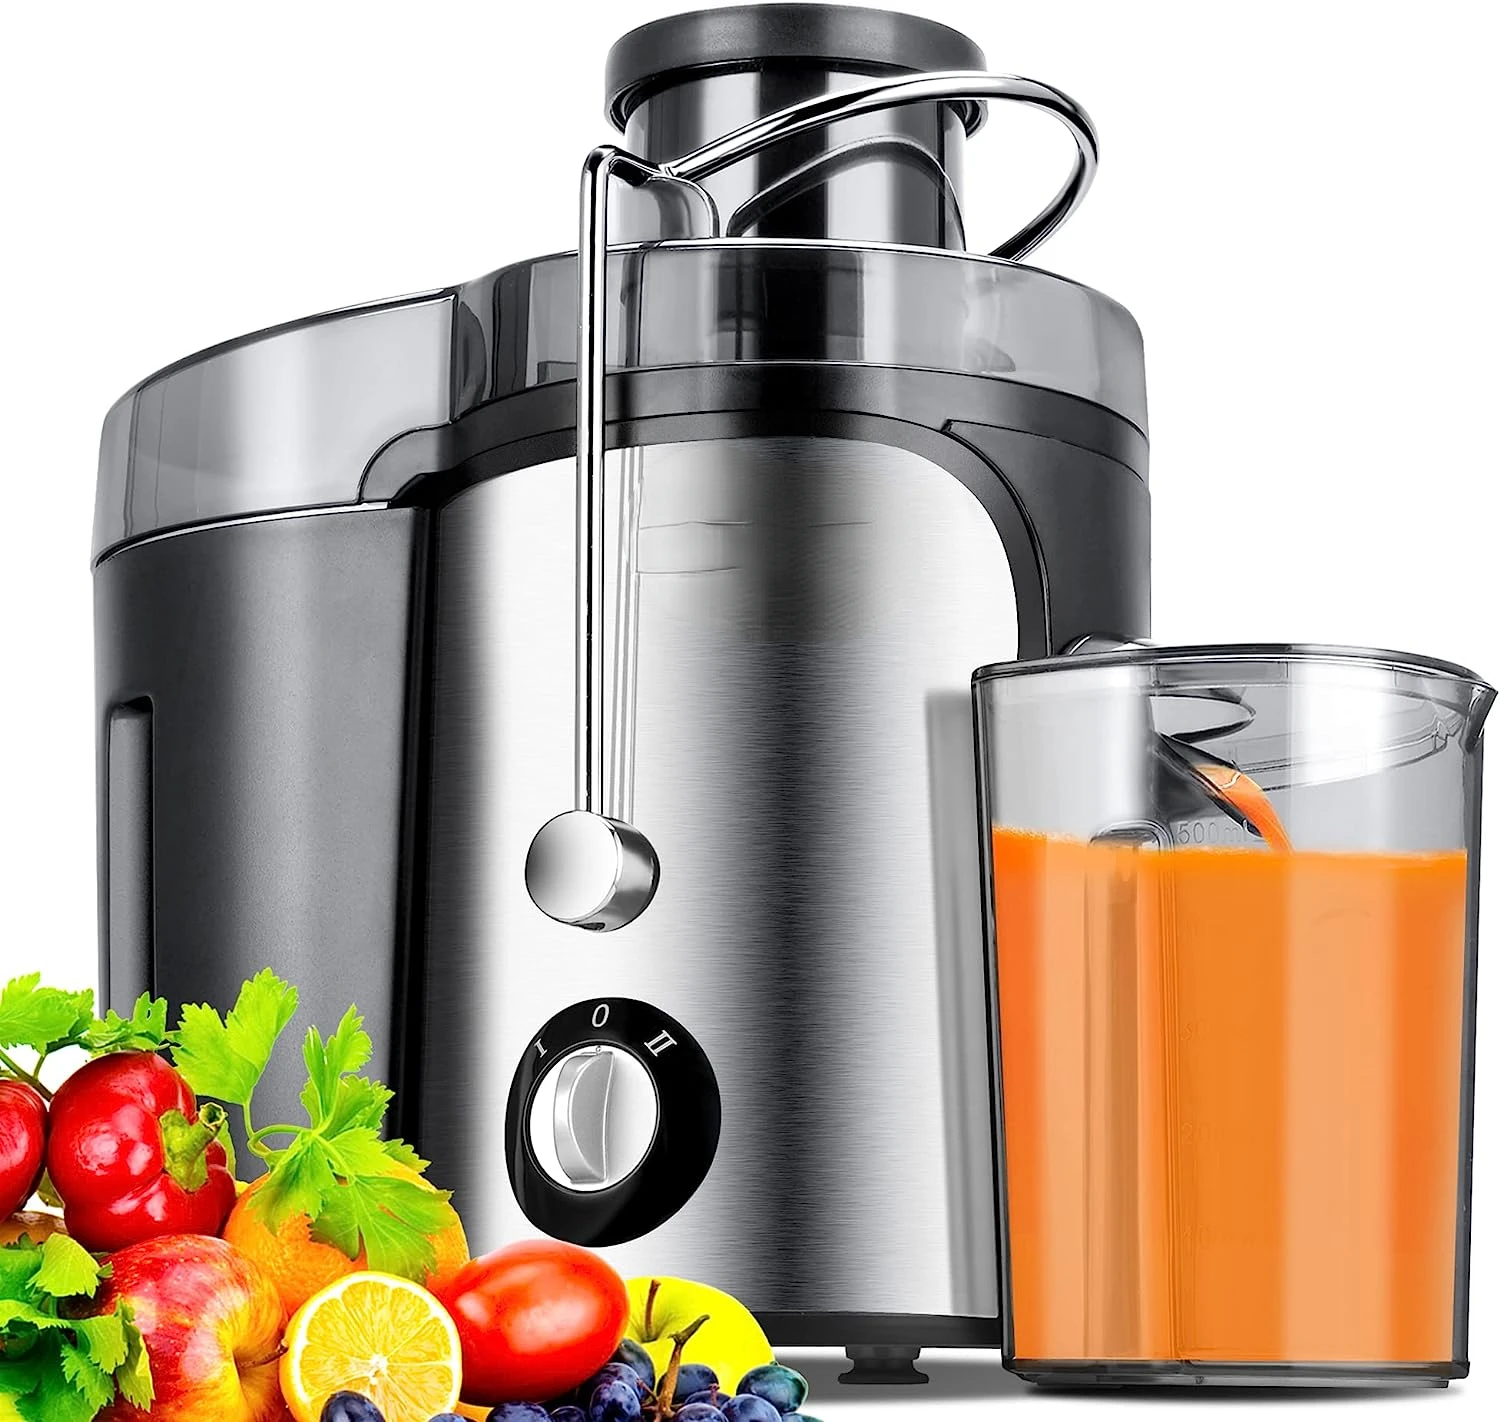 

600W Juicer Machines 3 Speeds with 3'' Feed Chute, Juicer Extractor for Whole Fruits & Vegs, Dishwasher Safe, BPA-Fr Eyebrow set